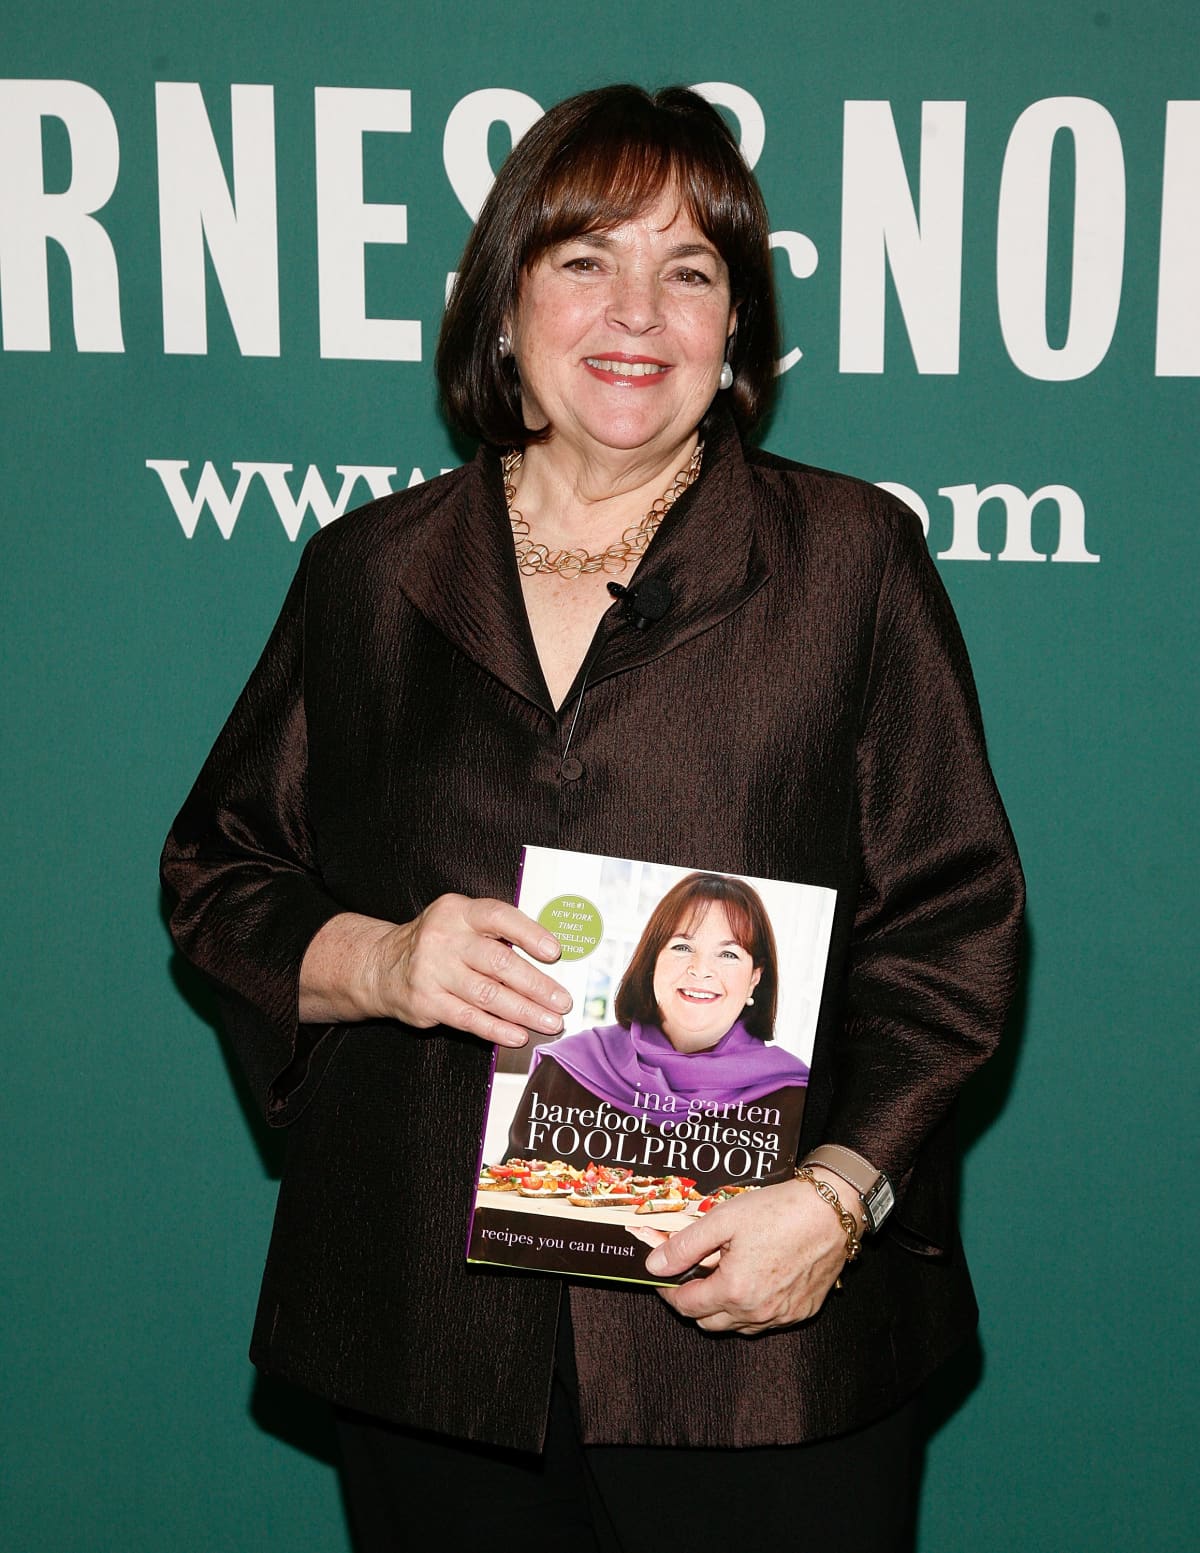 Ina Garten smiling at Barnes and Noble event